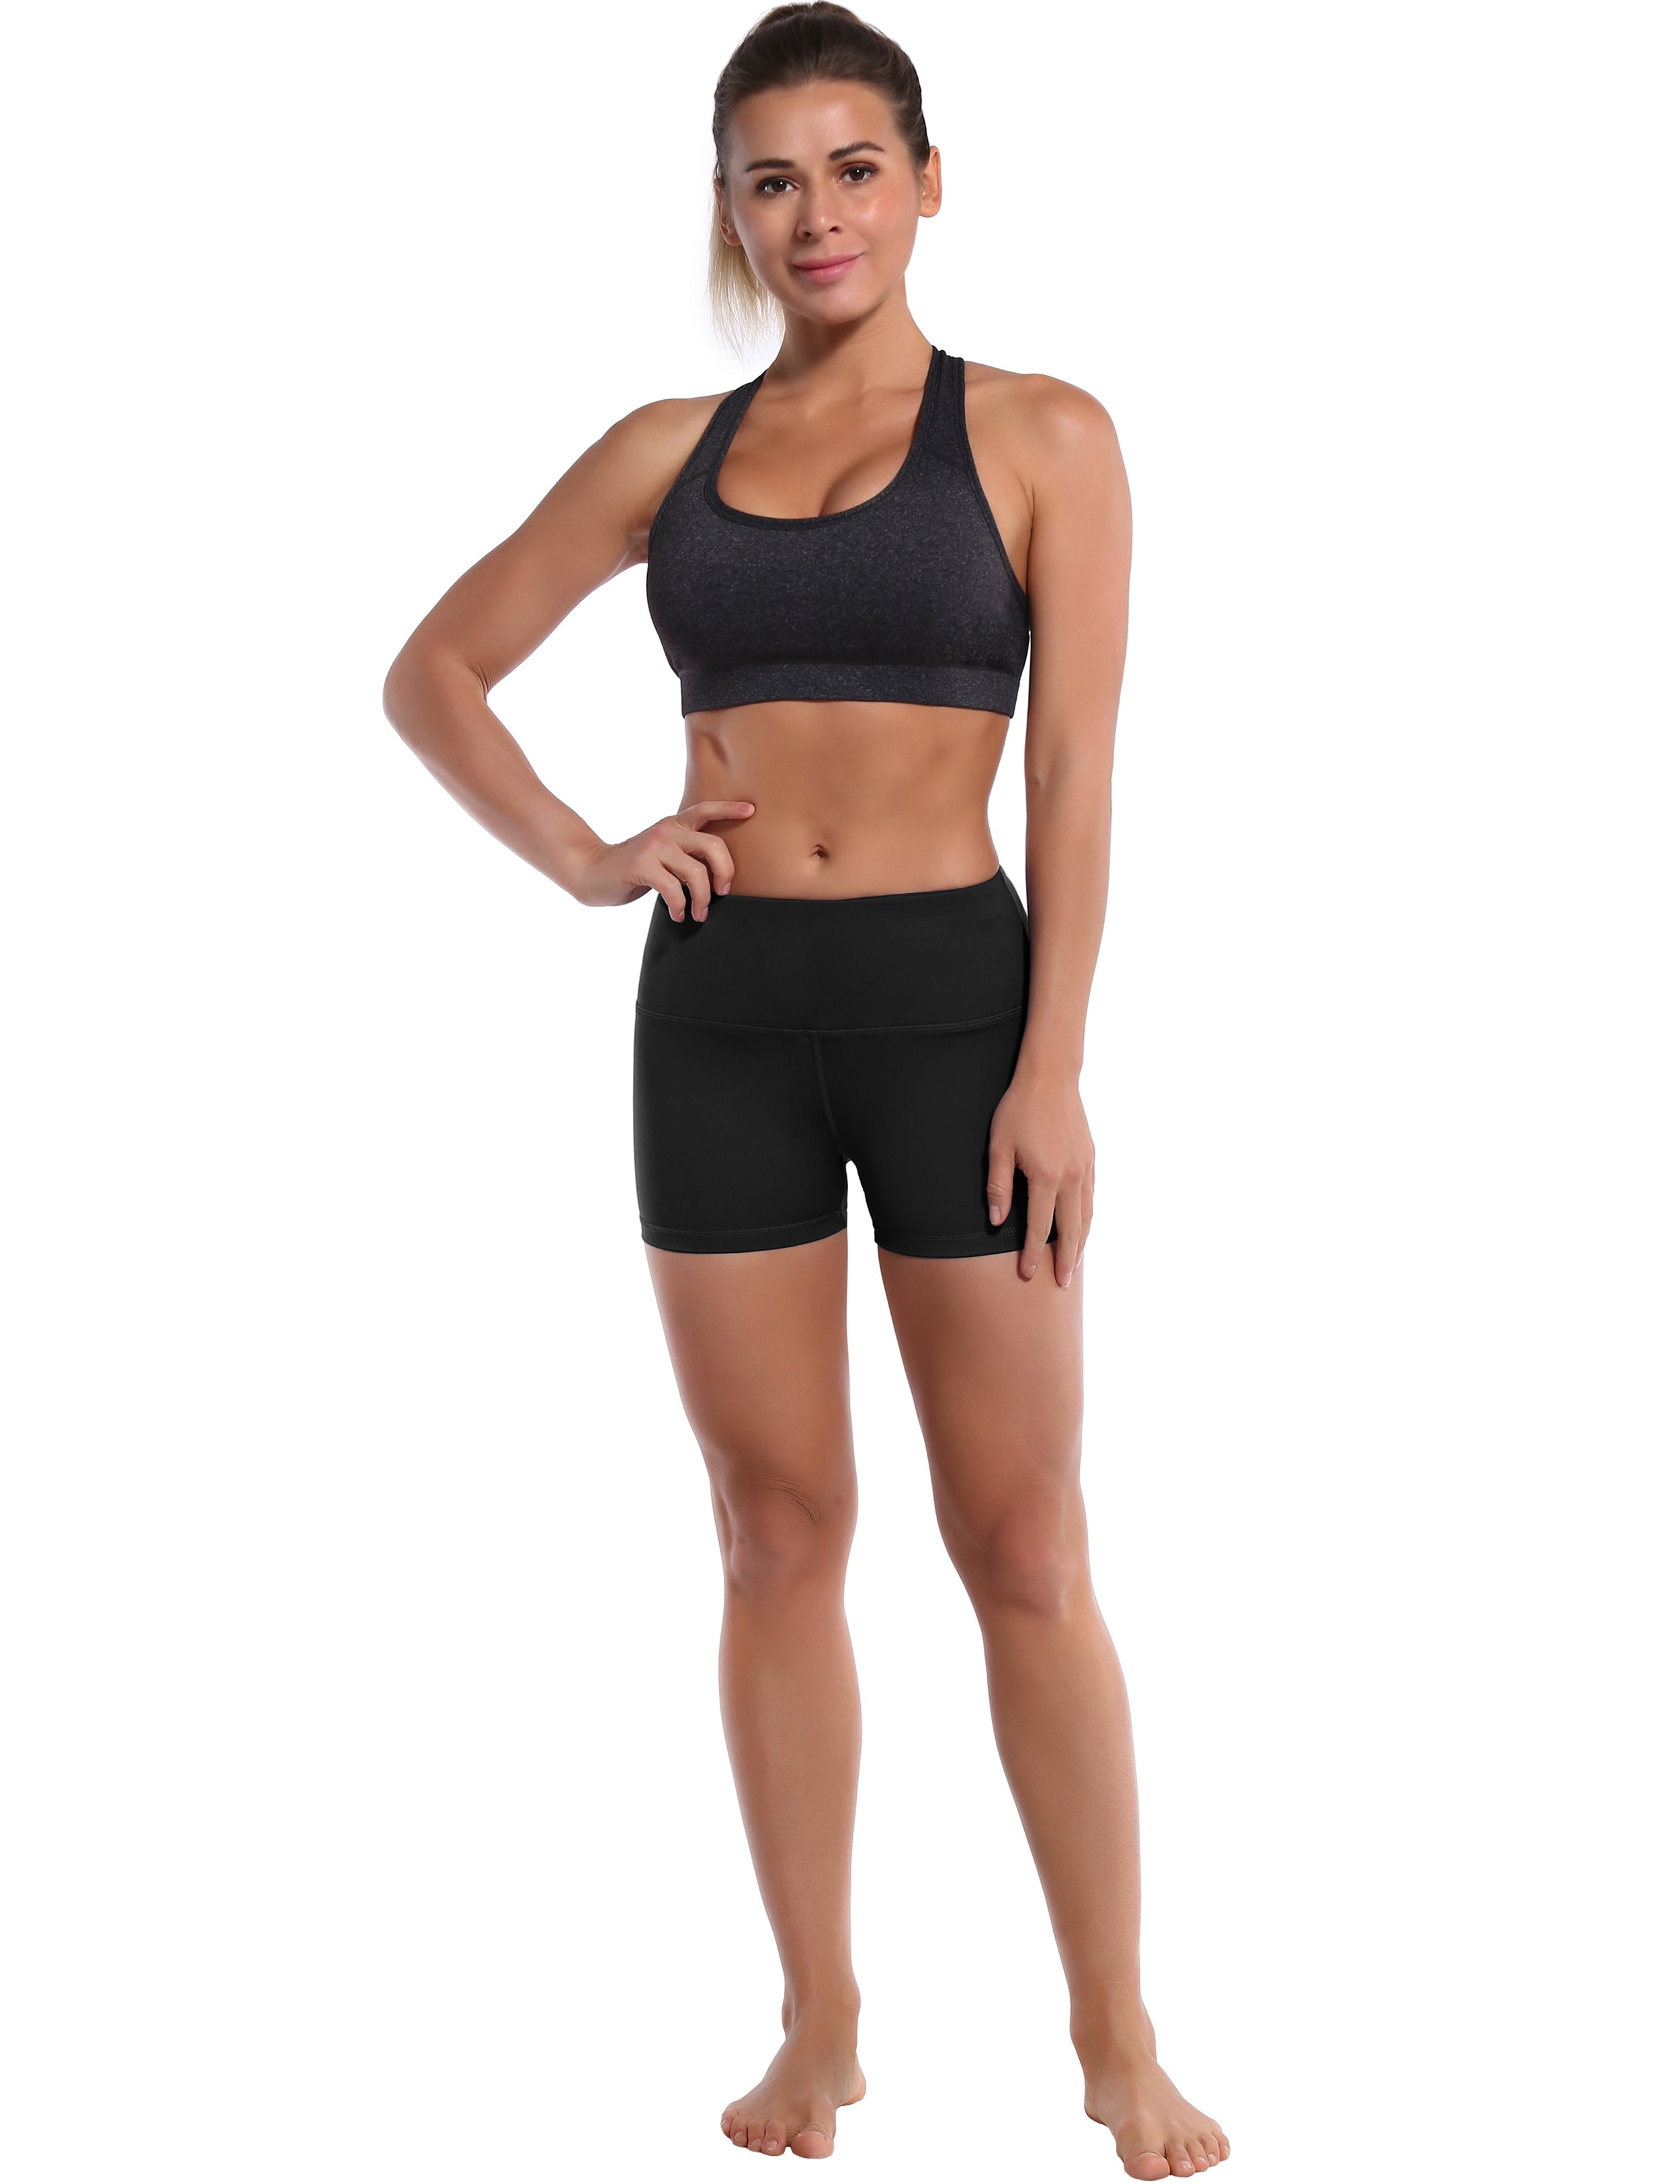 2.5" Running Shorts black Softest-ever fabric High elasticity High density 4-way stretch Fabric doesn't attract lint easily No see-through Moisture-wicking Machine wash 75% Nylon, 25% Spandex